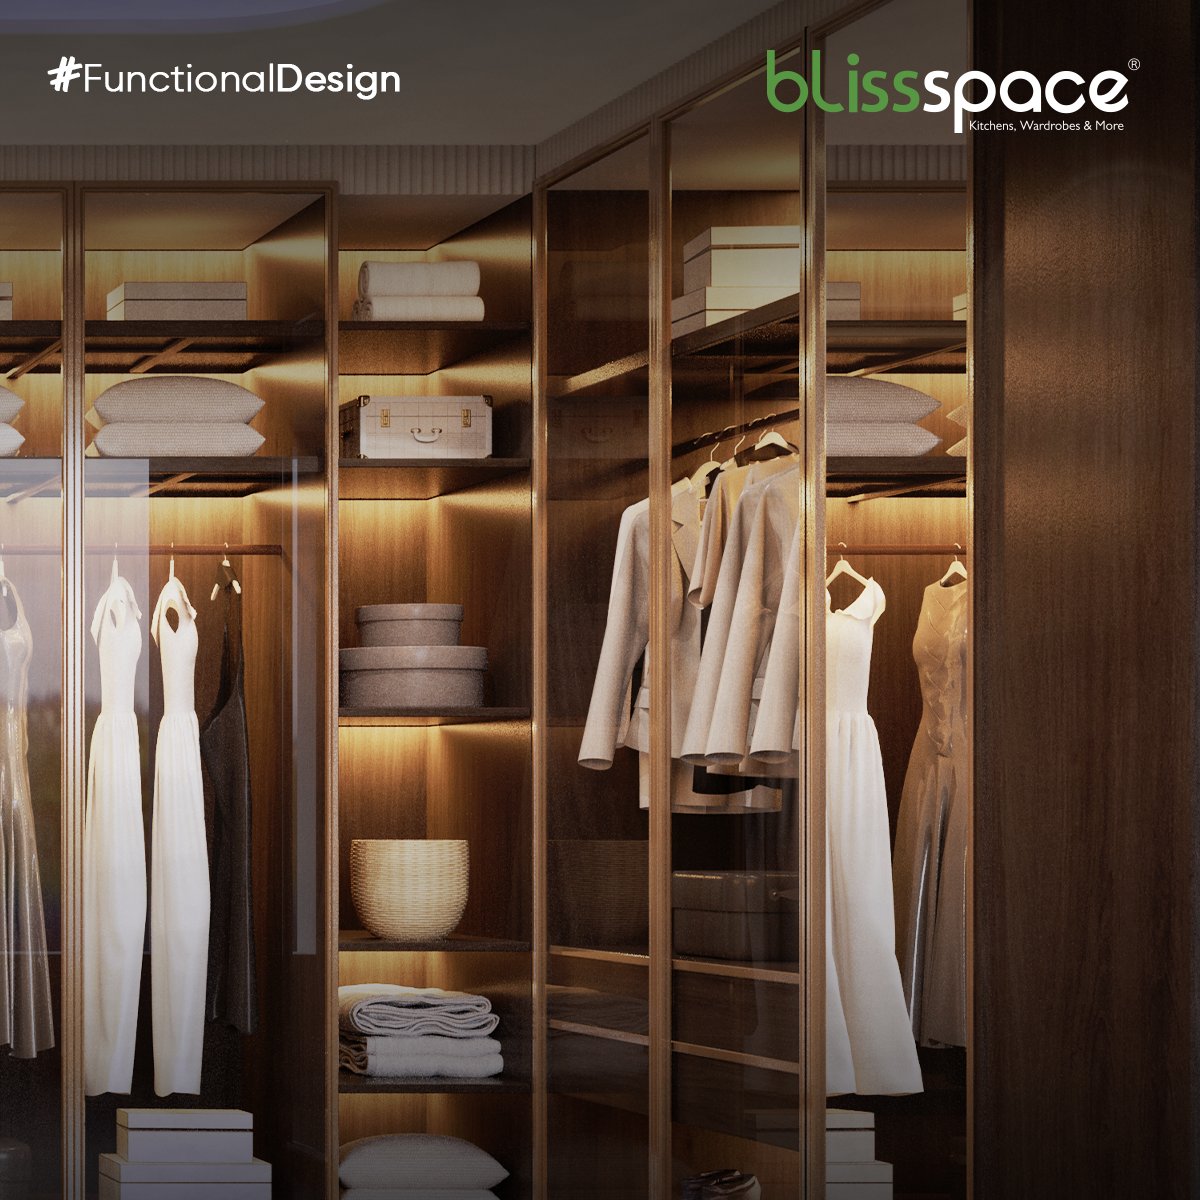 The perfect wardrobe for you is the one you fall in love with.

#BlissspaceIndia #Blissspace #BlissspaceDesigns #HomeDesigns  #Interiors #InteriorDesign #LuxuryInteriors #BathroomInteriors #ModularDesigns #ModularSolutions #ModularKitchen #HomesByBlissSpace #BlissSpaceHomes